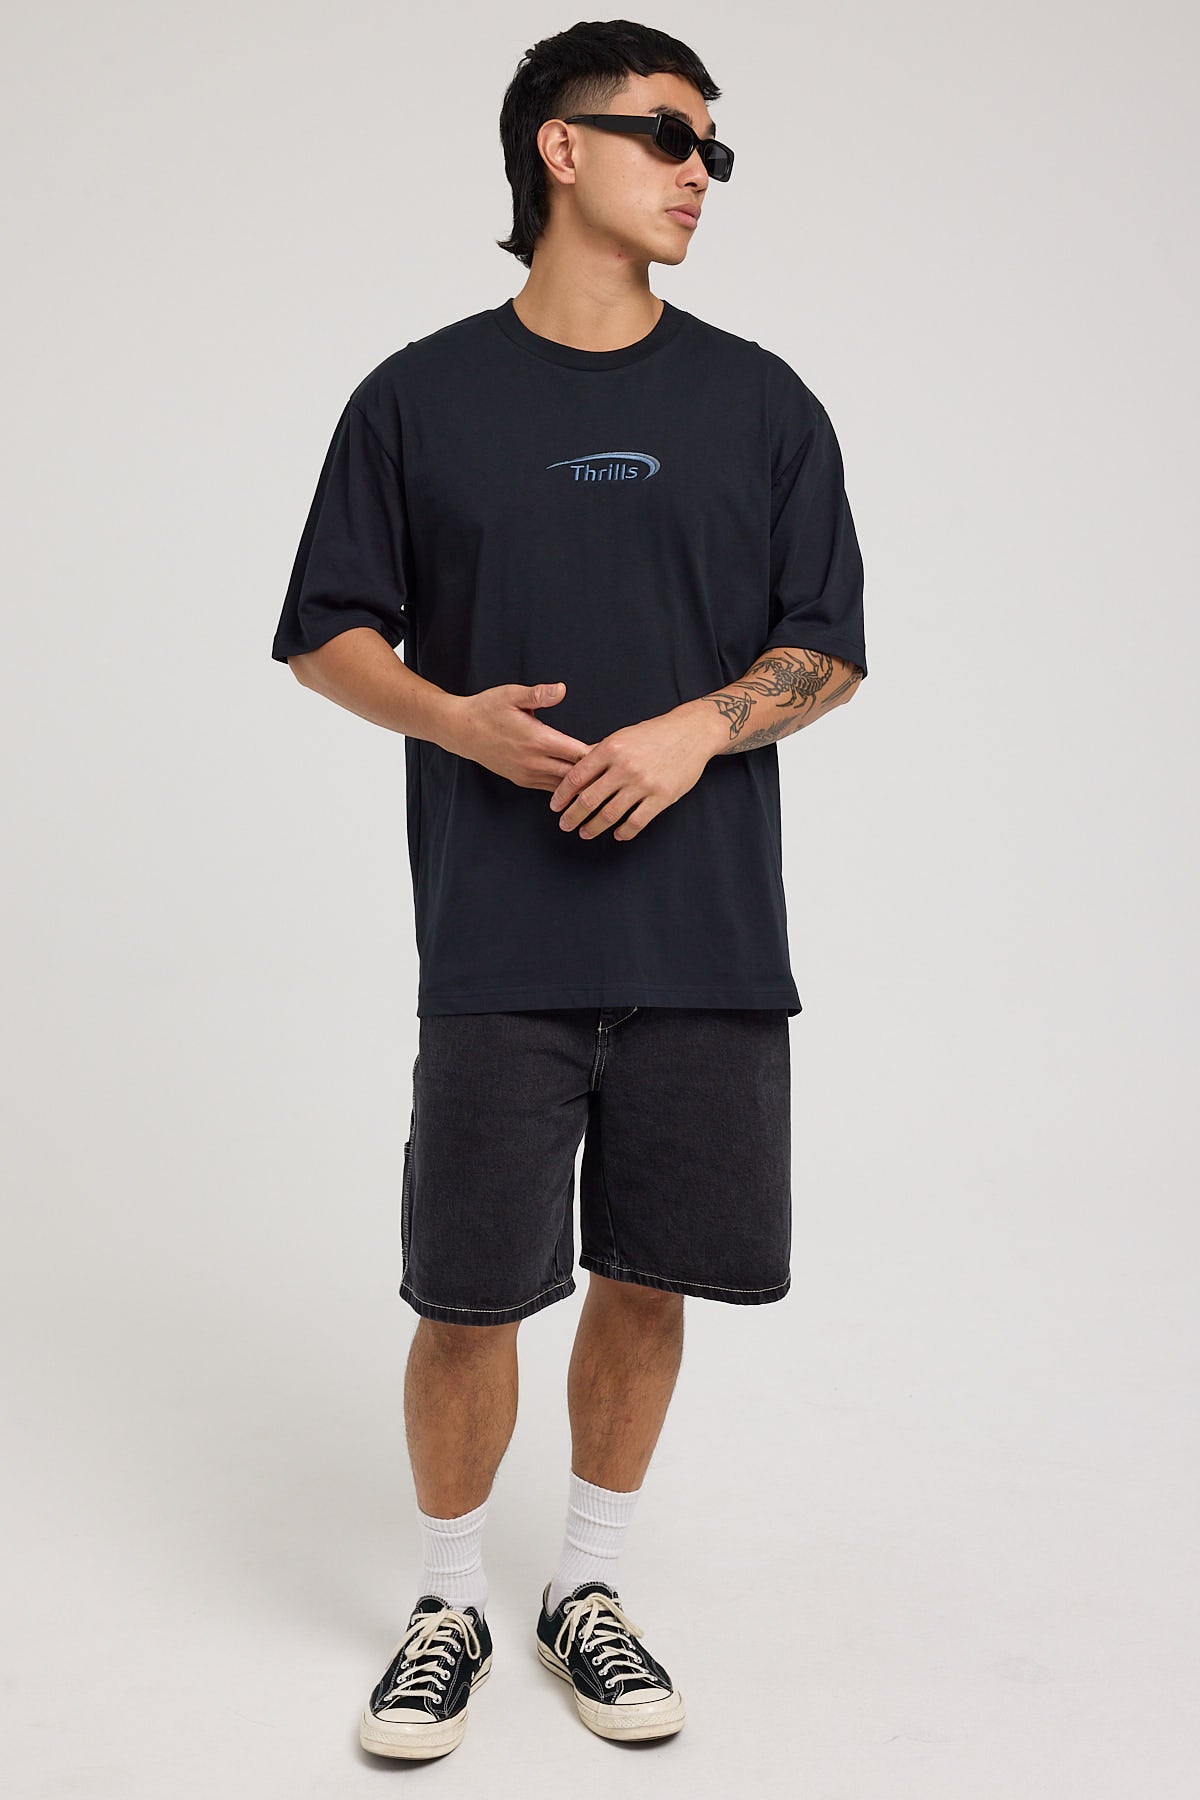 Thrills Sphere Embro Oversize Fit Tee Washed Black